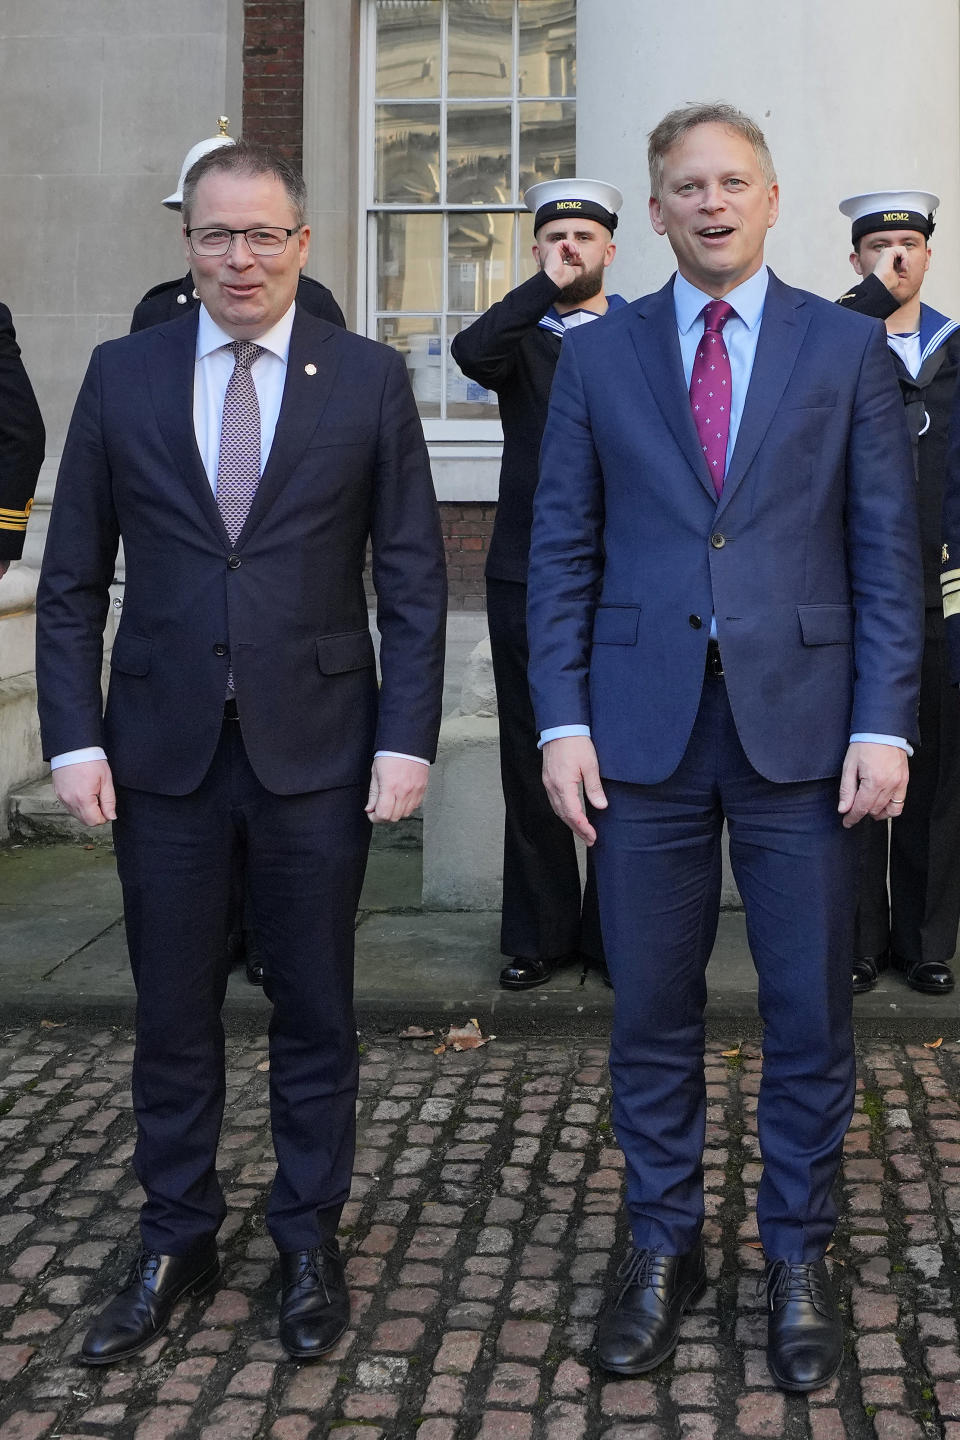 Britain's Defence Secretary Grant Shapps, right, smiles with Norway's Minister of Defence Bjorn Arild Gram during a meeting , in London, Monday, Dec. 11, 2023. Britain's Ministry of Defense is transferring two minehunting ships to Ukraine as part of a package of long-term support to bolster security in the Black Sea. The transfer comes as Britain and Norway announce plans for a new maritime coalition to increase support for Ukraine in the war with Russia. (AP Photo/Kirsty Wigglesworth)